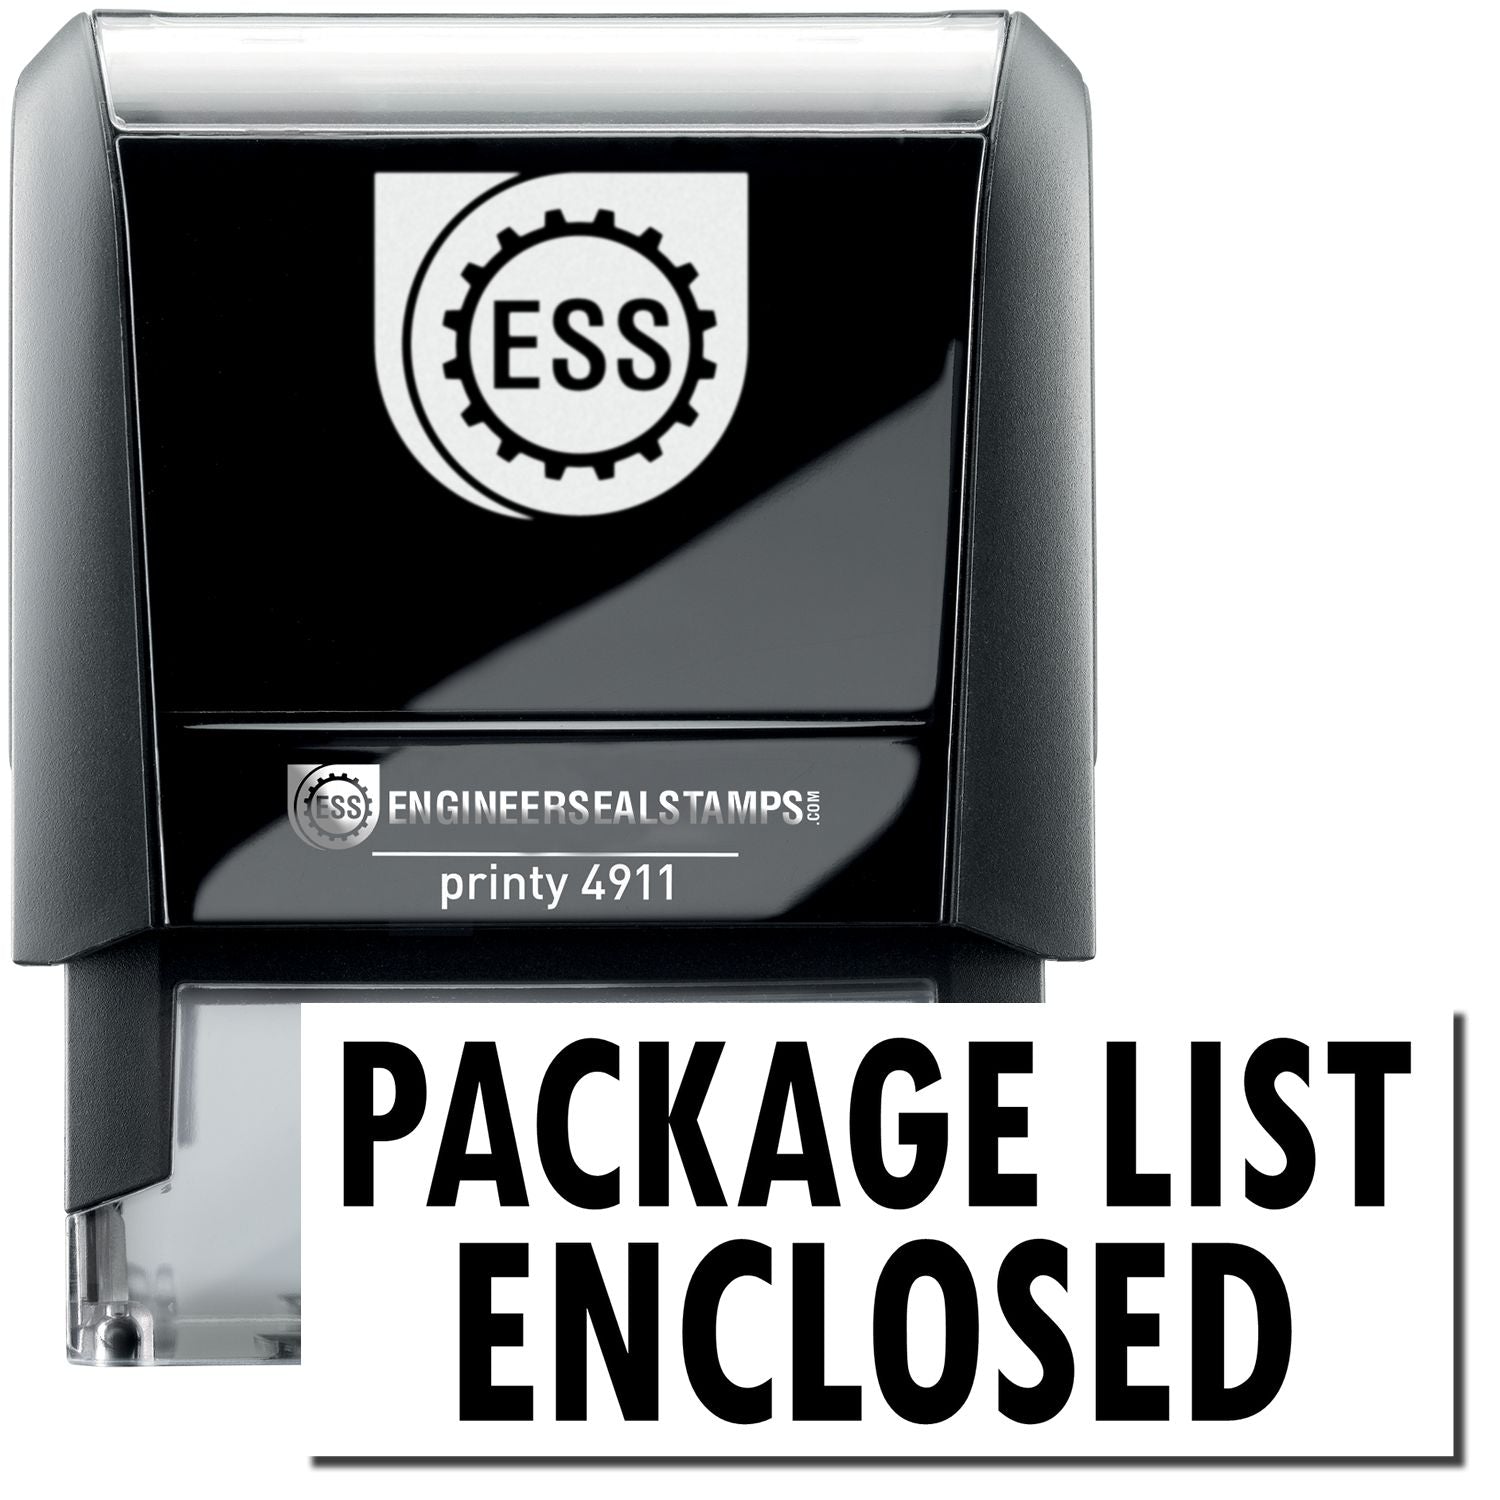 A self-inking stamp with a stamped image showing how the text "PACKAGE LIST ENCLOSED" is displayed after stamping.